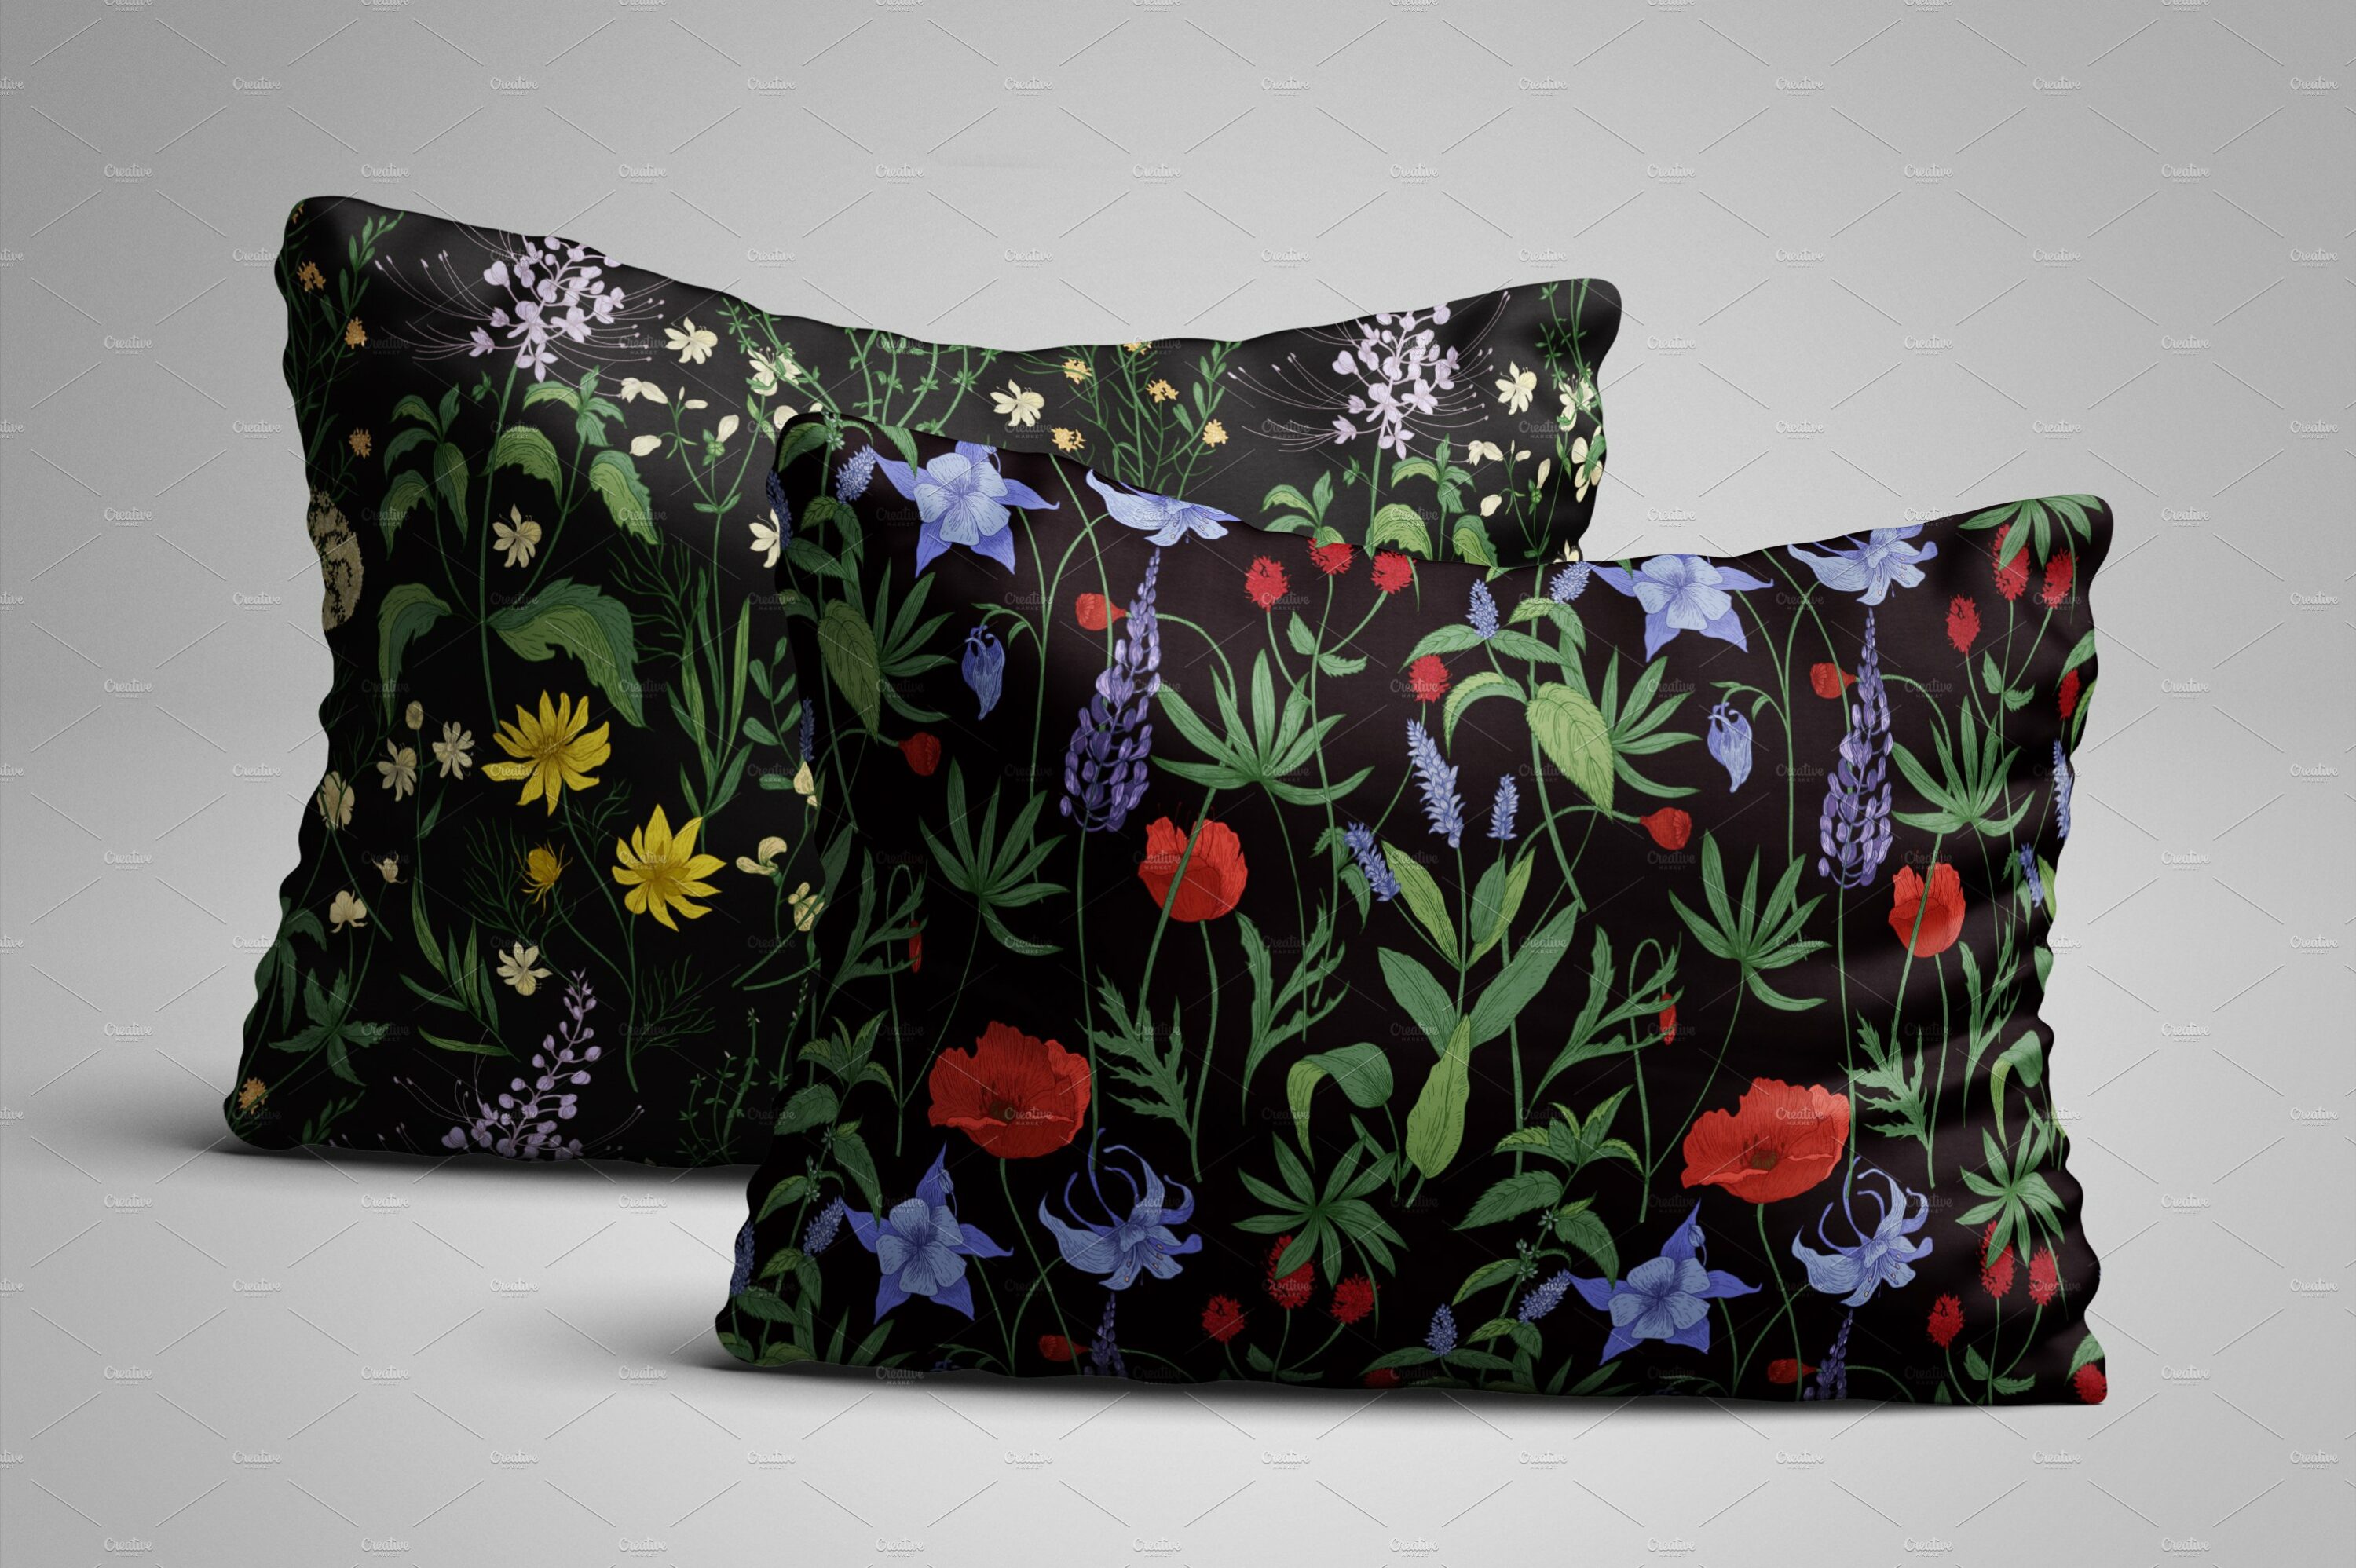 Two pillows with flowers prints.